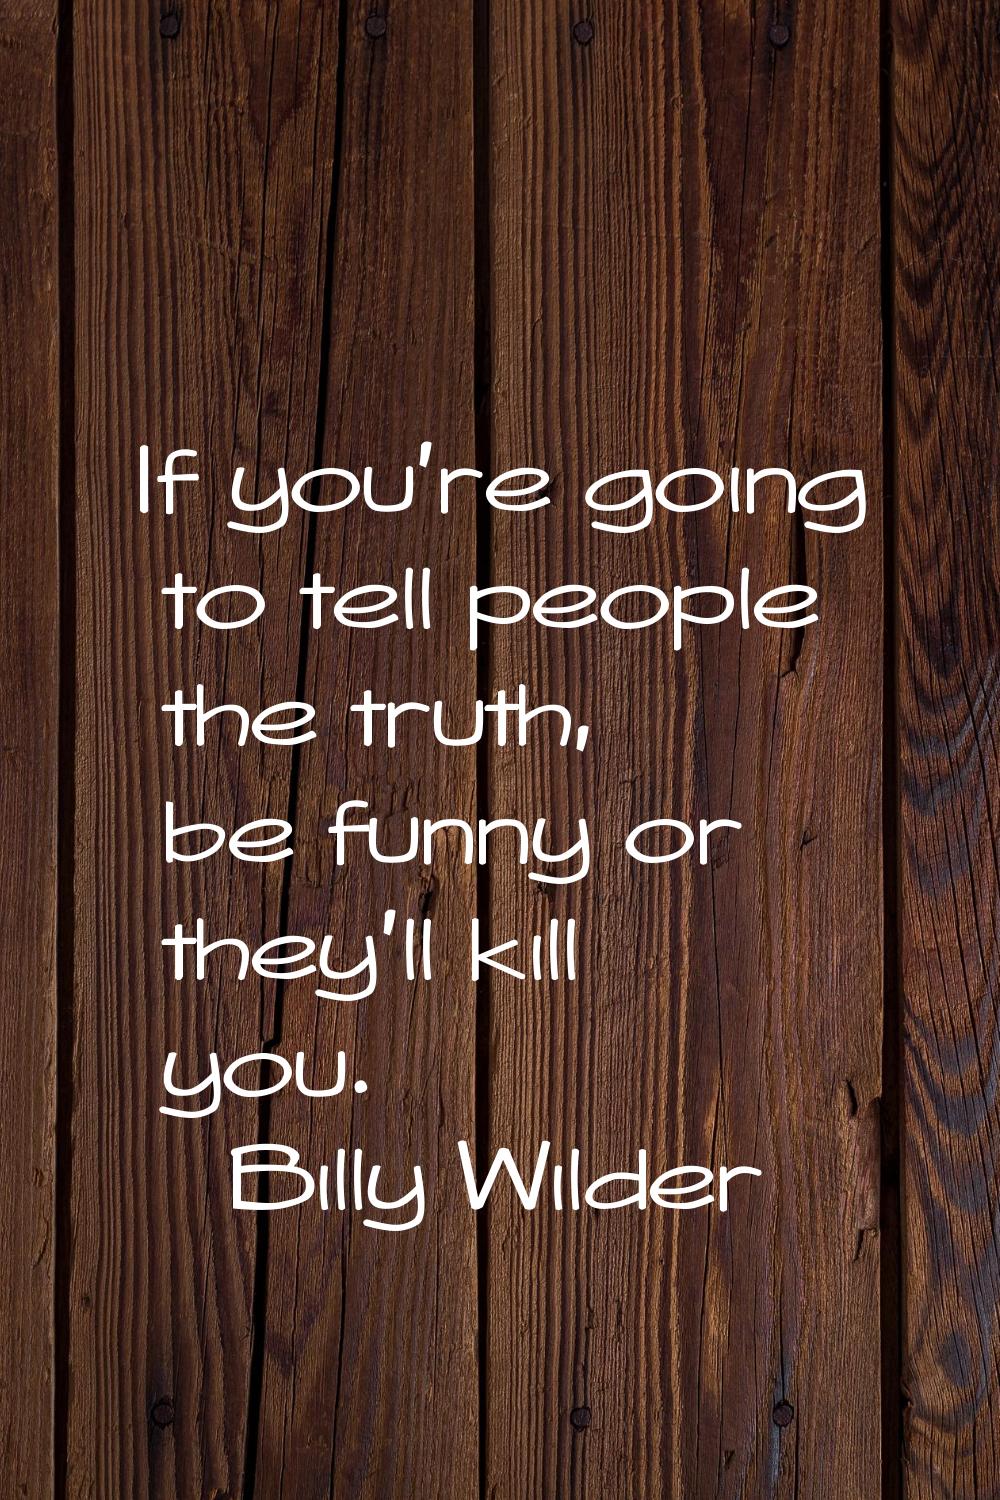 If you're going to tell people the truth, be funny or they'll kill you.